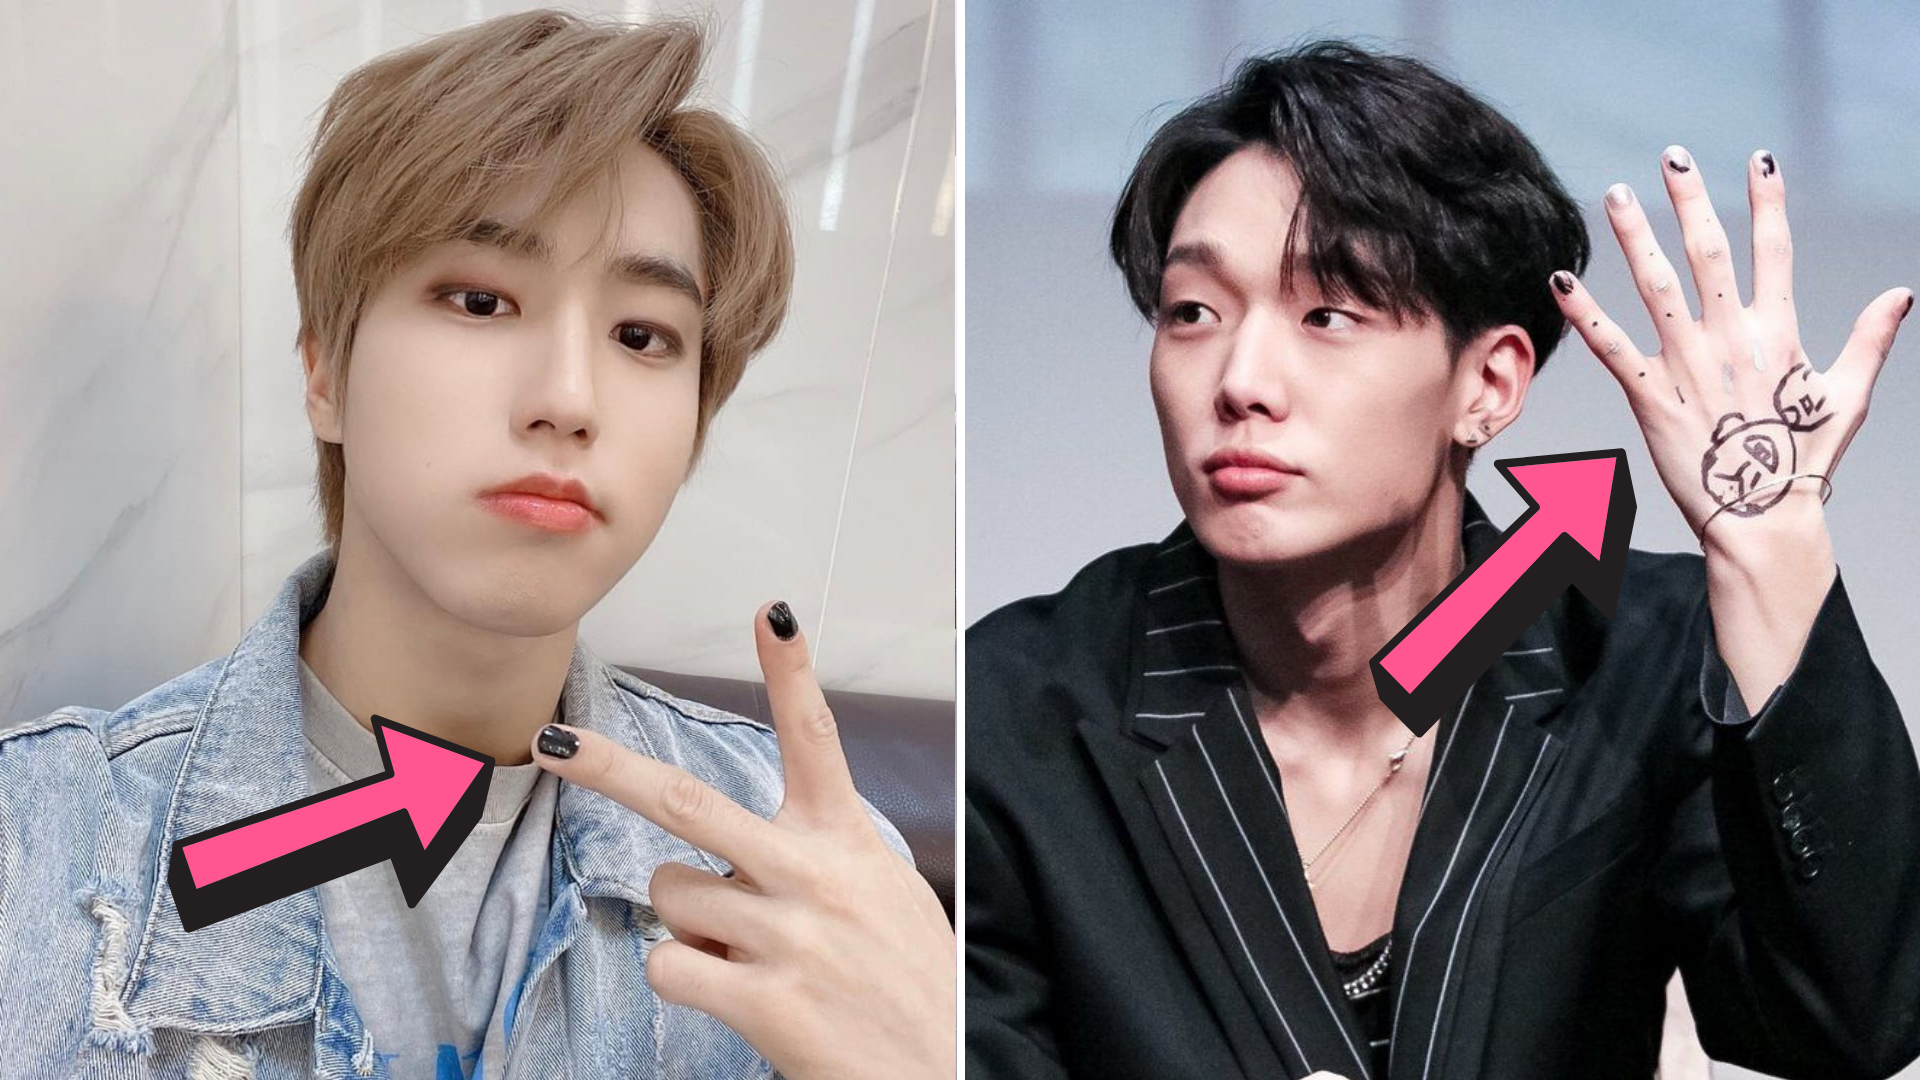 Why does Hongjoong from Ateez paint his pinky nail? - Quora